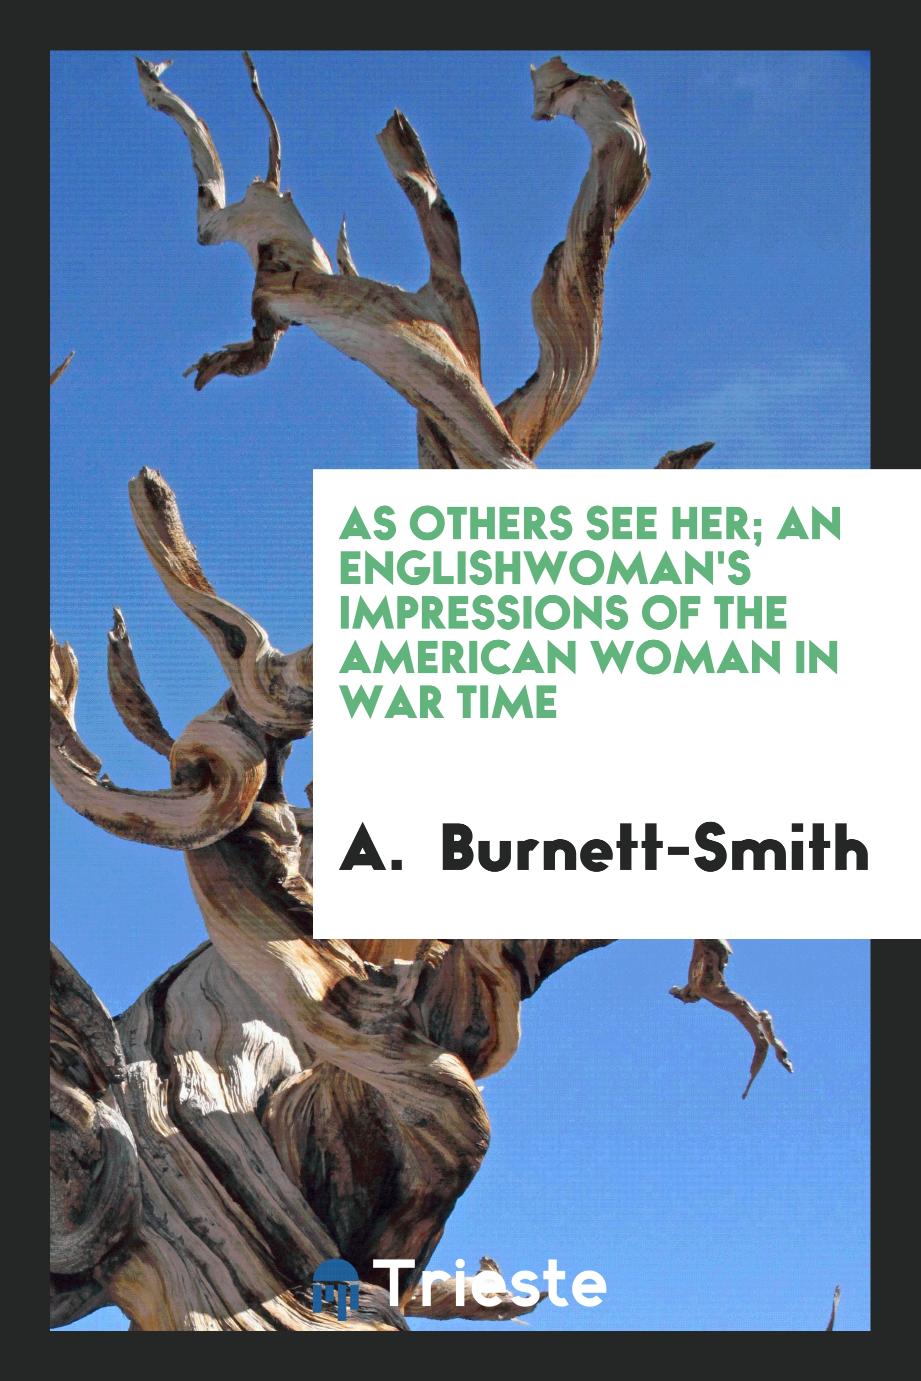 As others see her; an Englishwoman's impressions of the American woman in war time